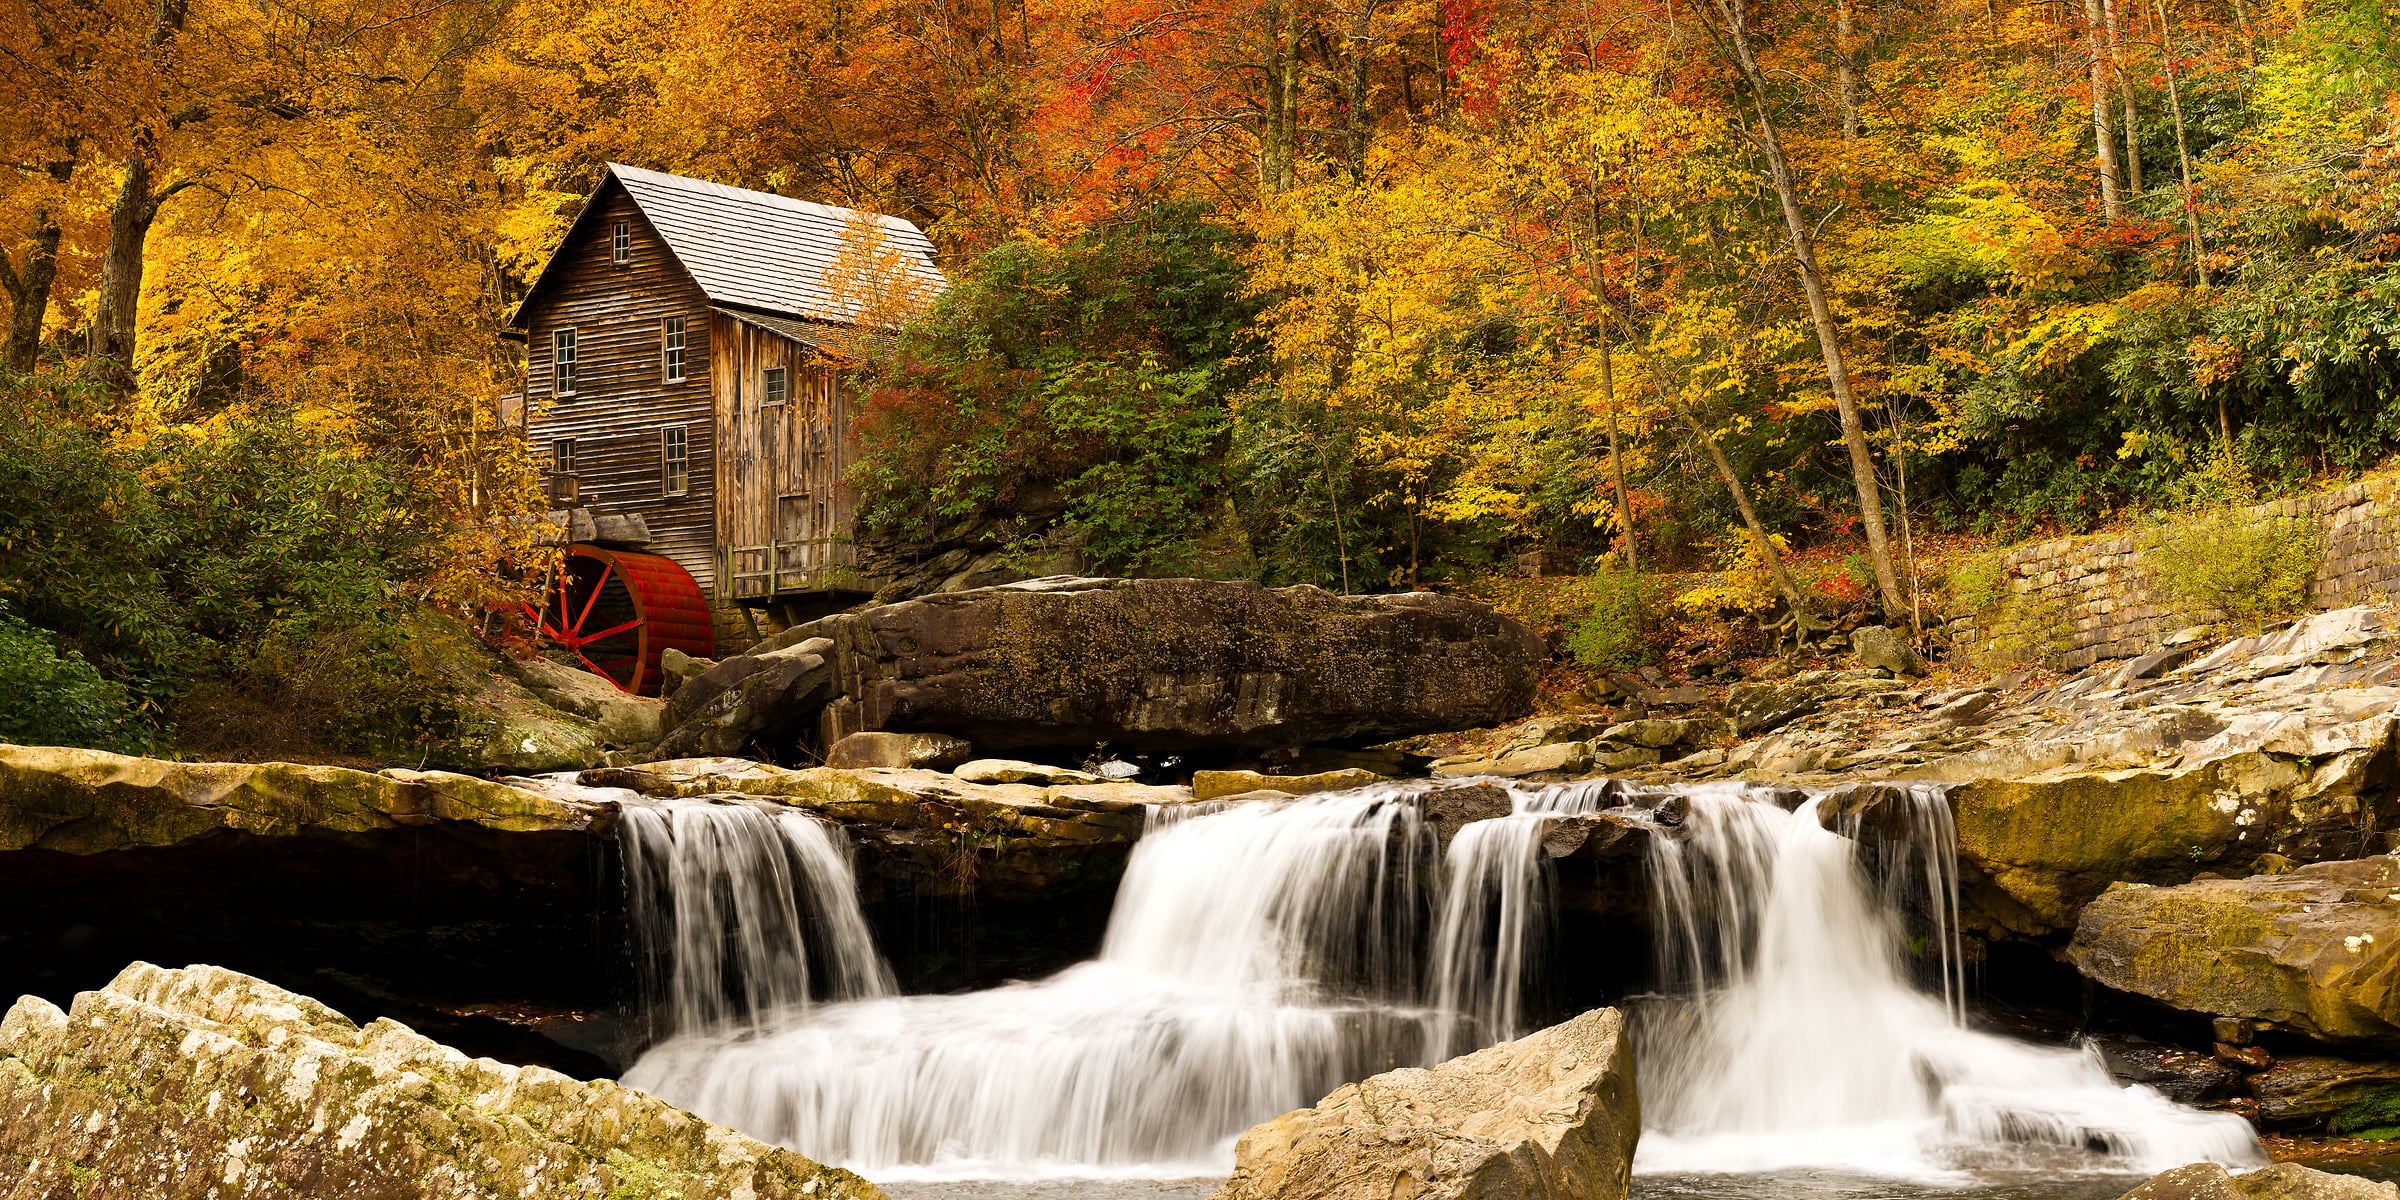 441 megapixels! A very high resolution, large-format VAST photo print of an autumn scene with fall foliage, a watermill, a forest, and waterfalls; landscape nature photograph created by David David at Glade Creek Grist Mill in Babcock State Park, West Virginia.